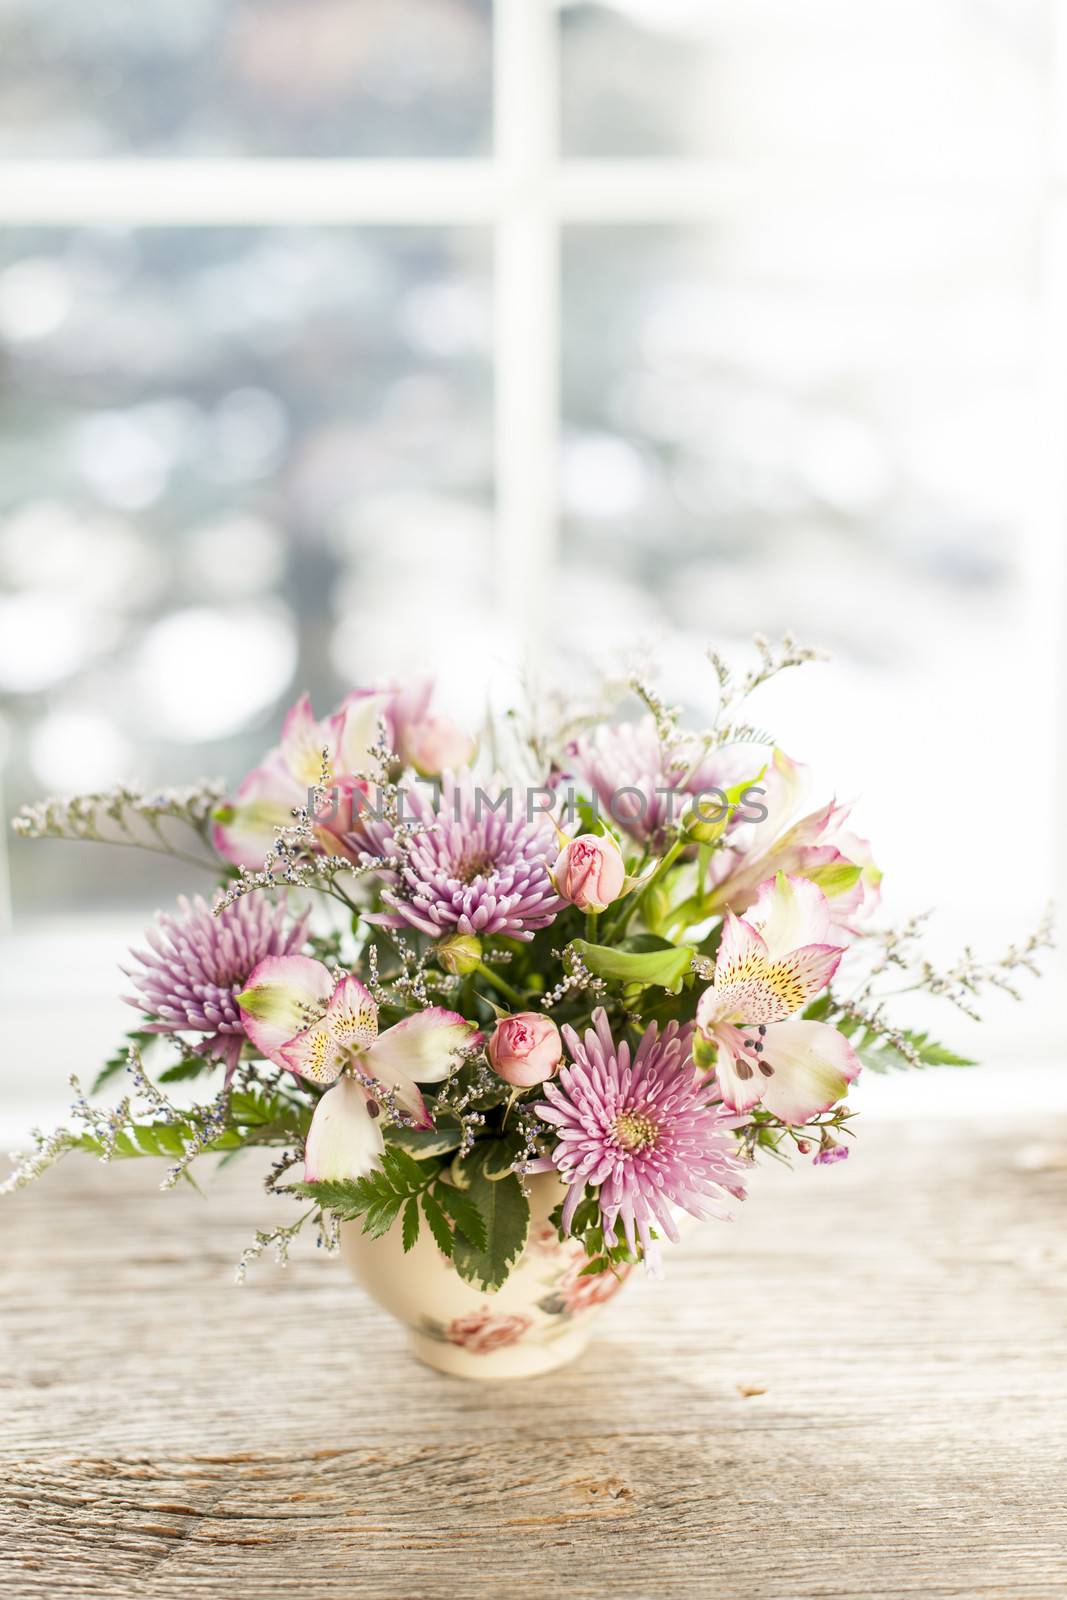 Bouquet of colorful flowers arranged in small vase